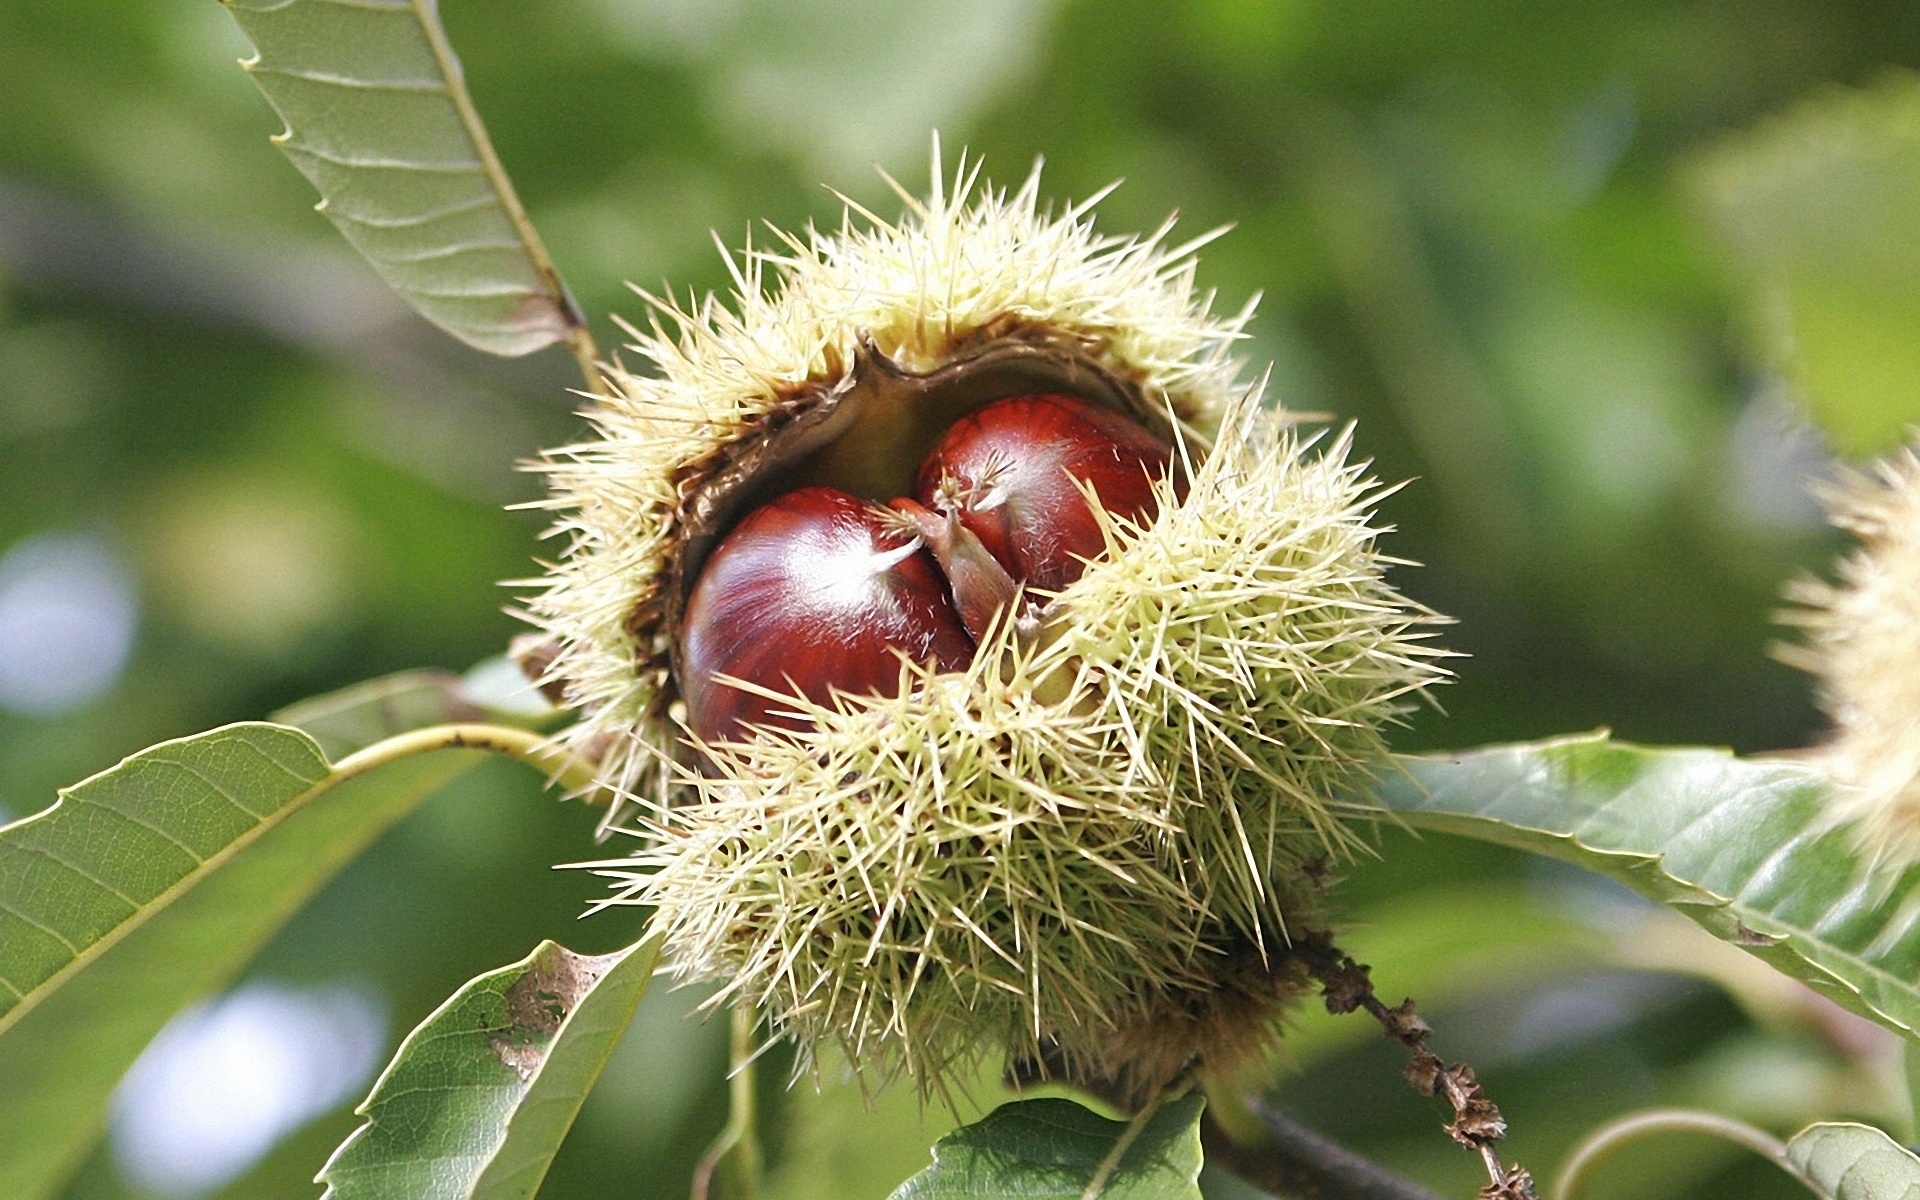 Chestnut HD wallpapers, High-quality backgrounds, Stunning imagery, Free download, 1920x1200 HD Desktop